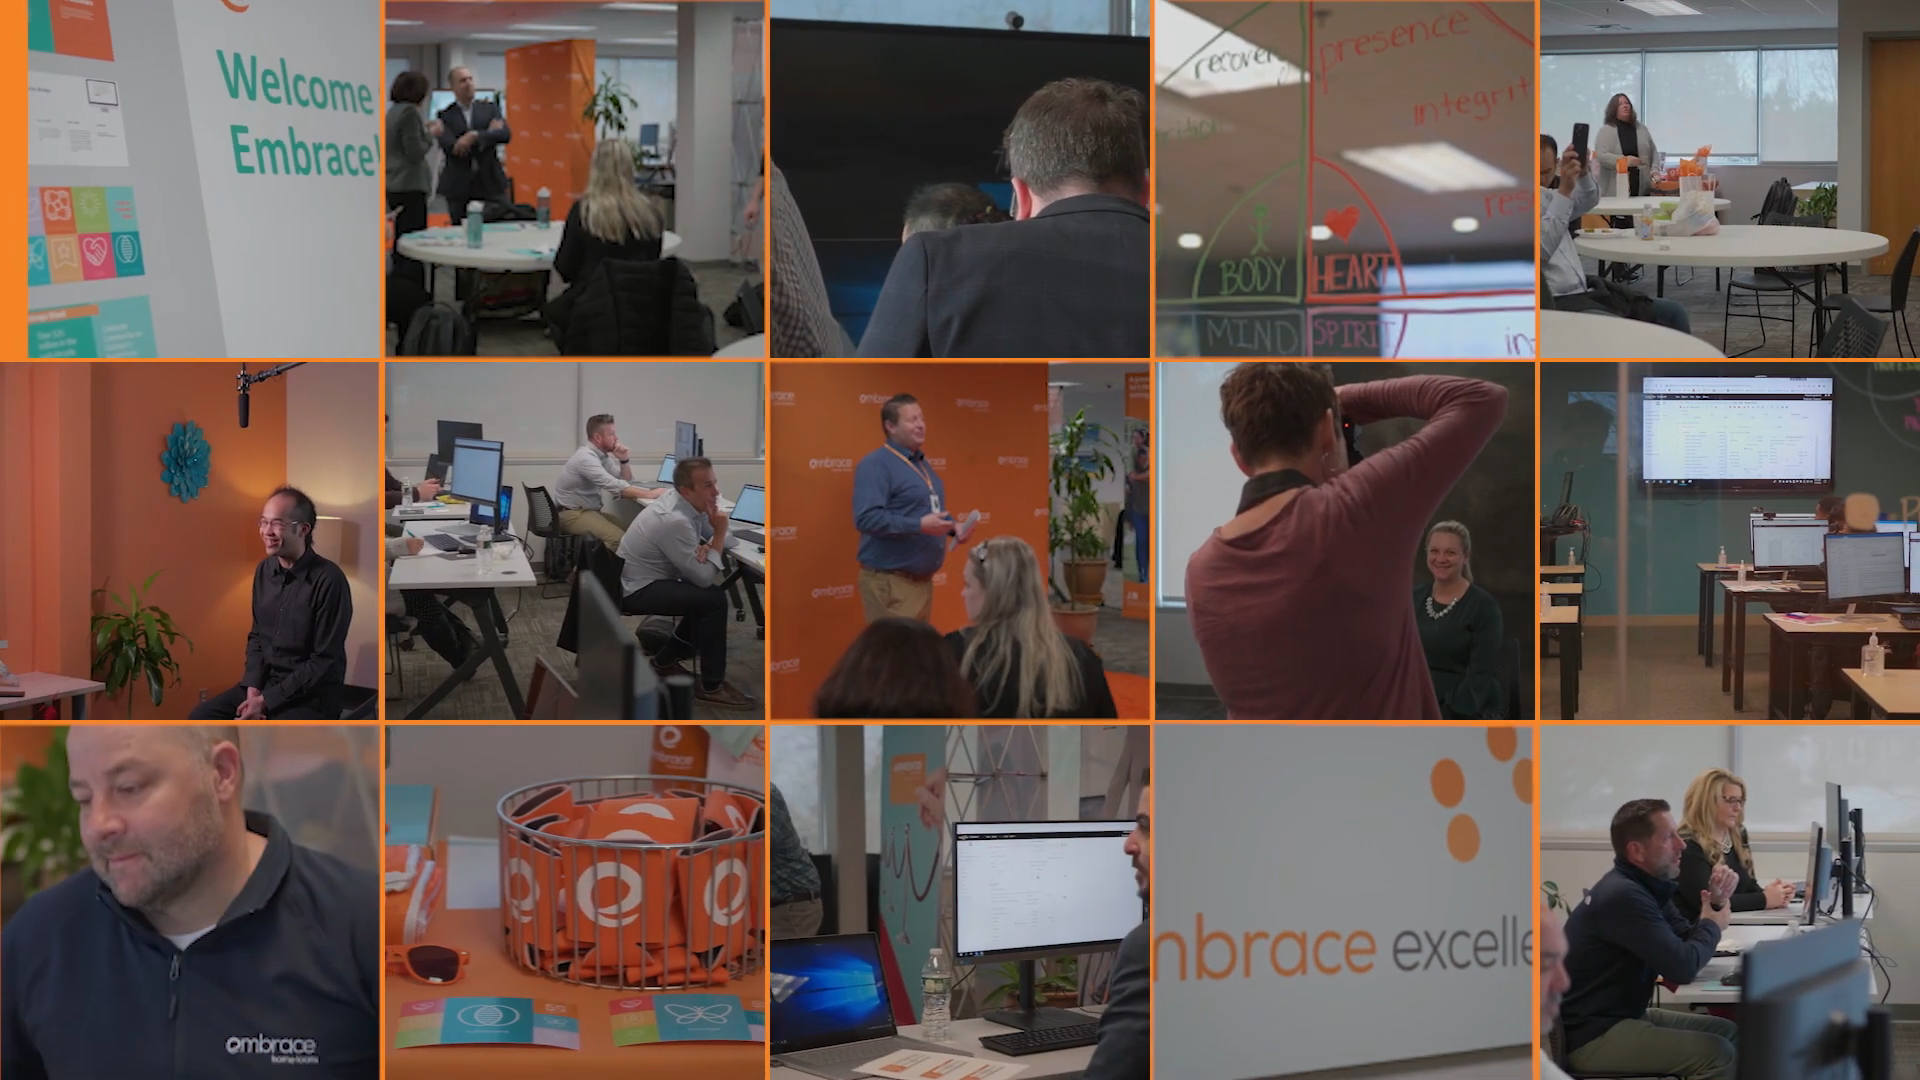 frame of some pictures of embrace employees activities